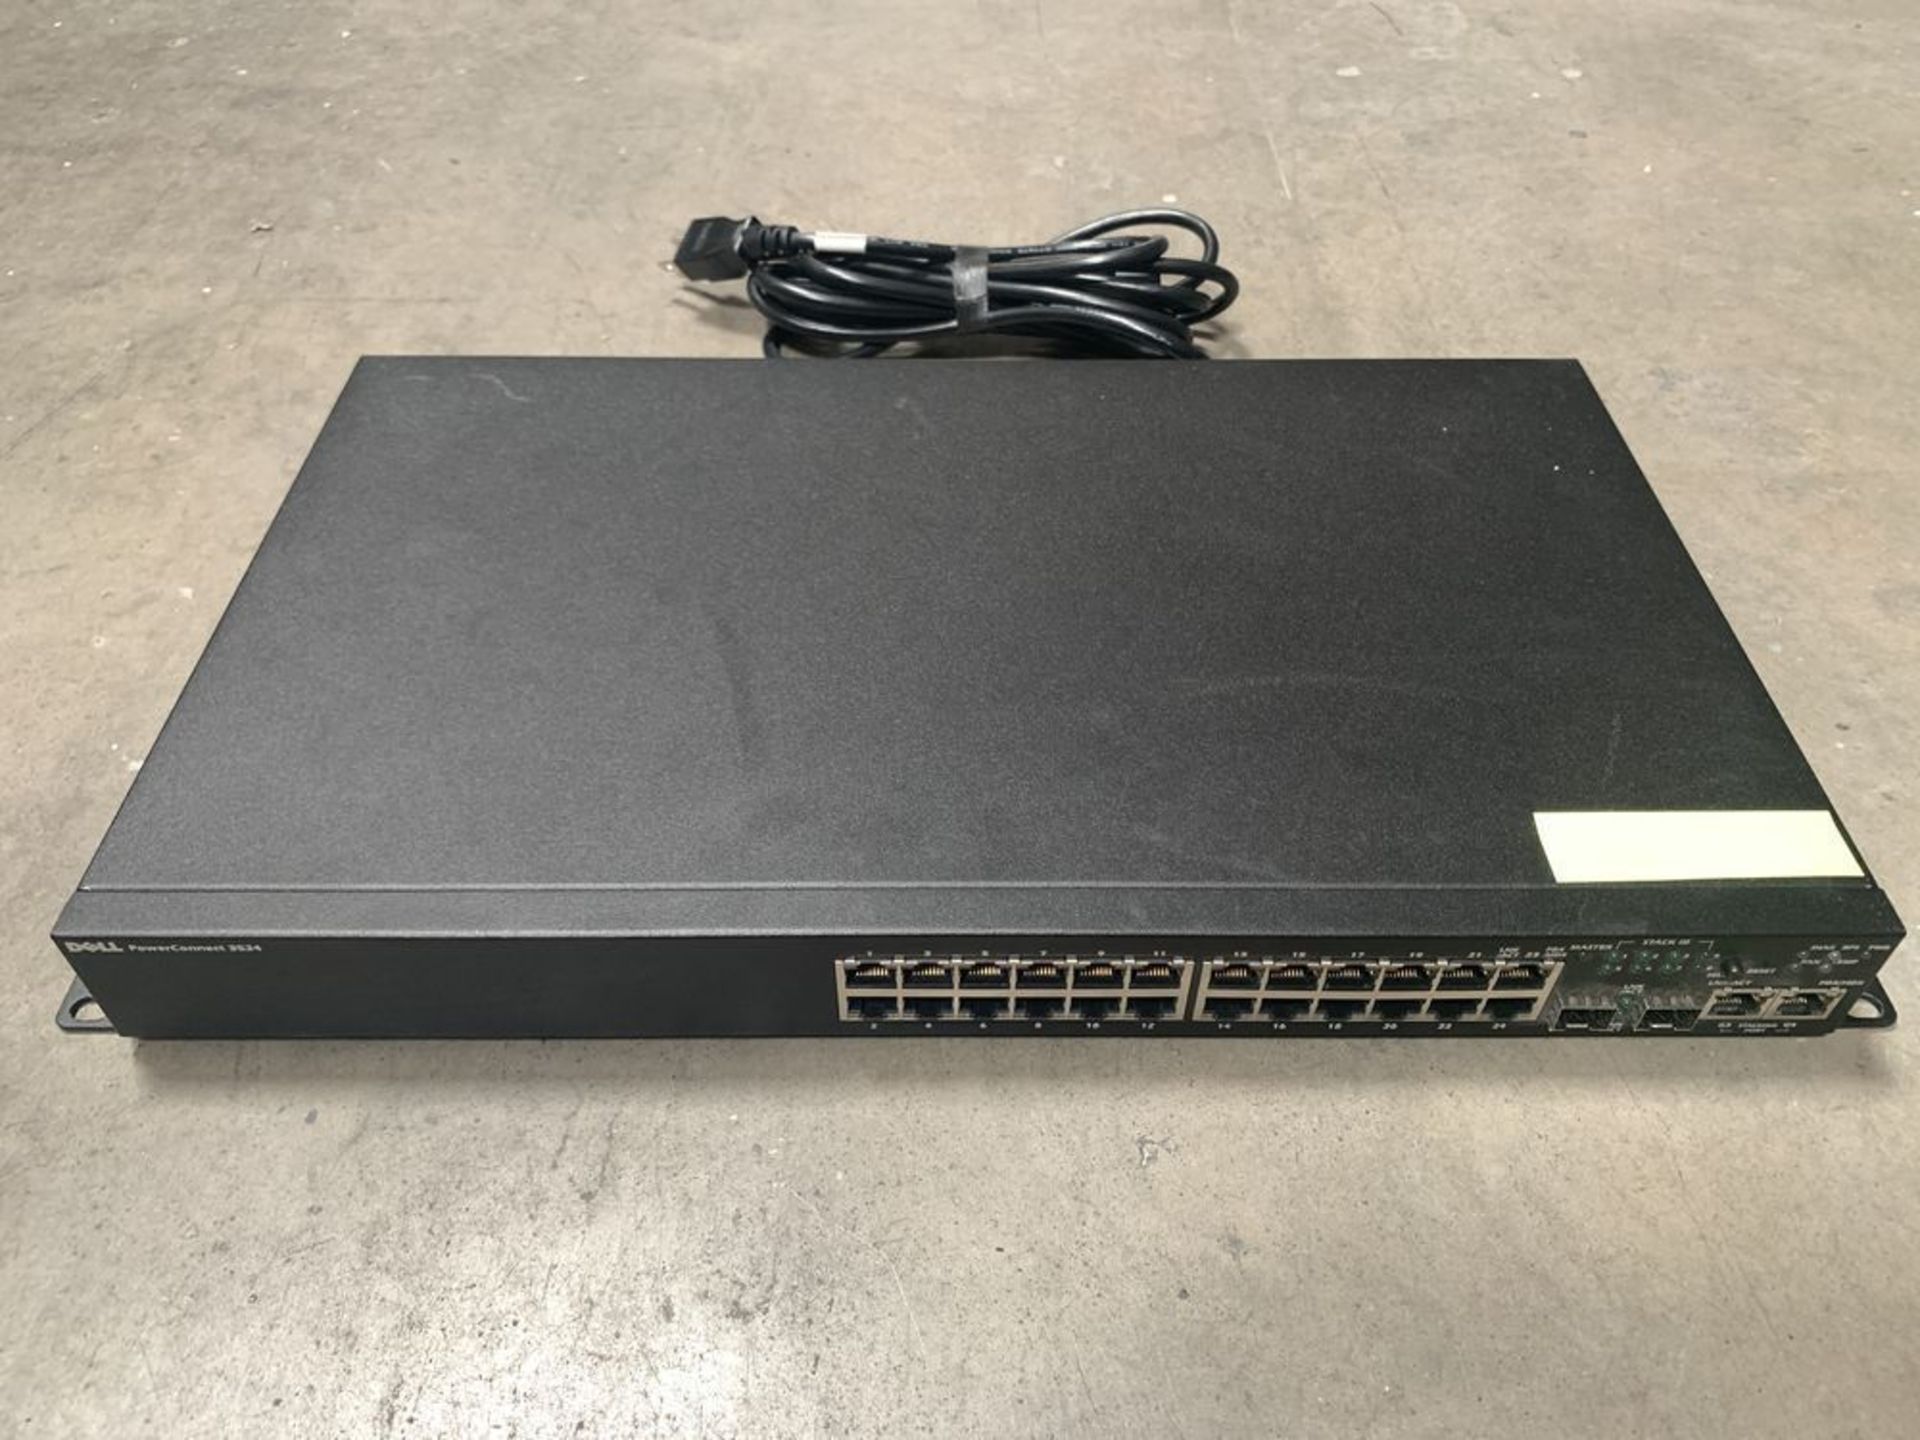 Dell PowerConnect 3524 Network Switch with Power CableWorking when last used